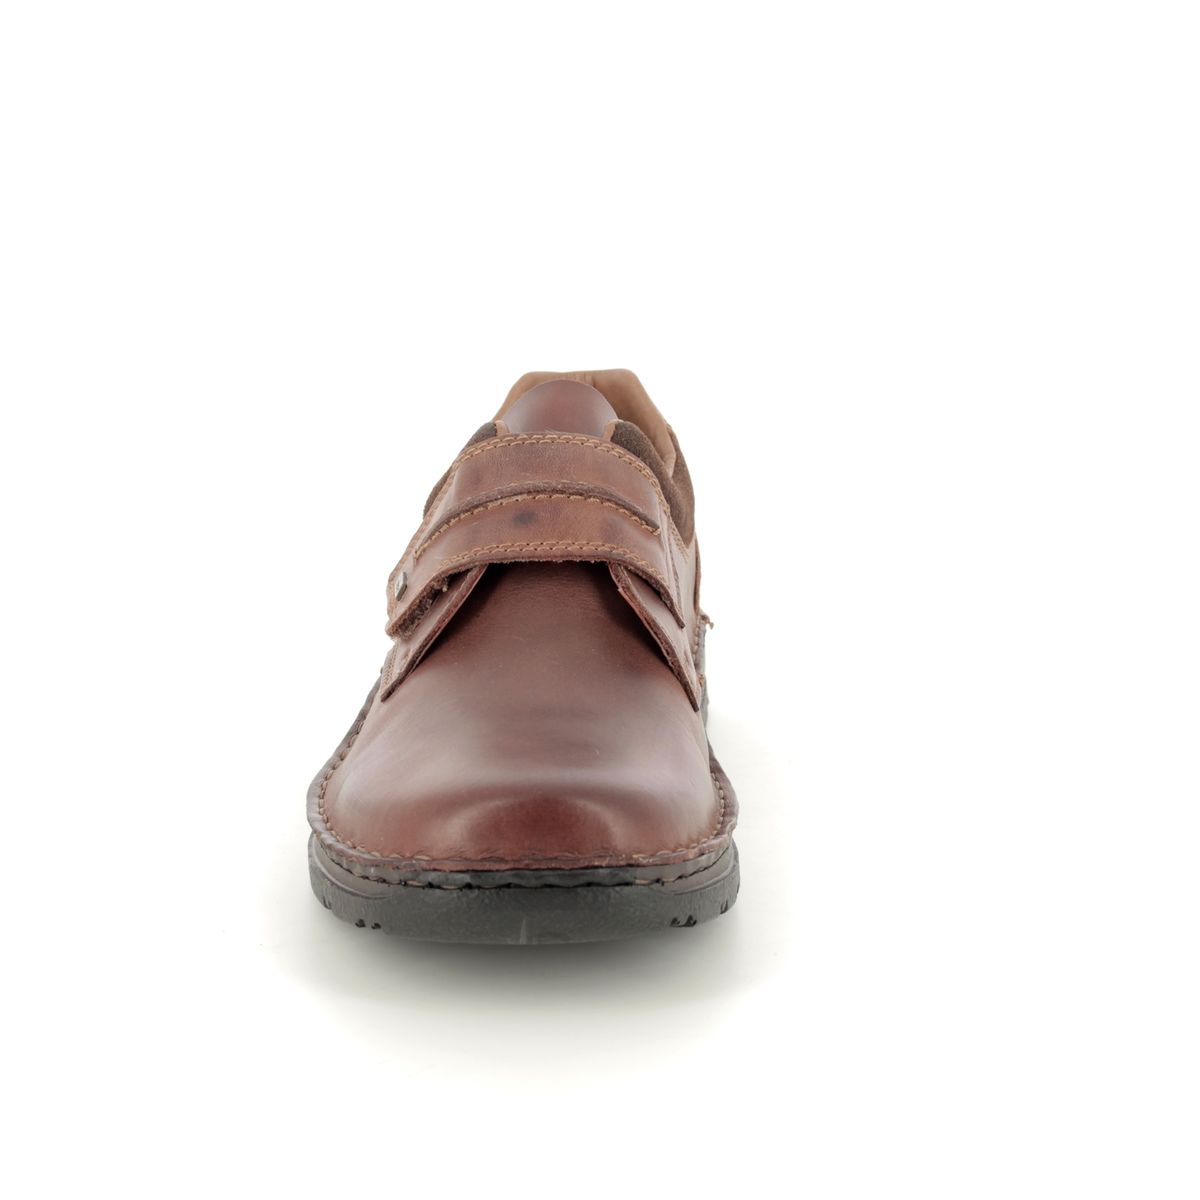 Rieker Brown leather formal shoes